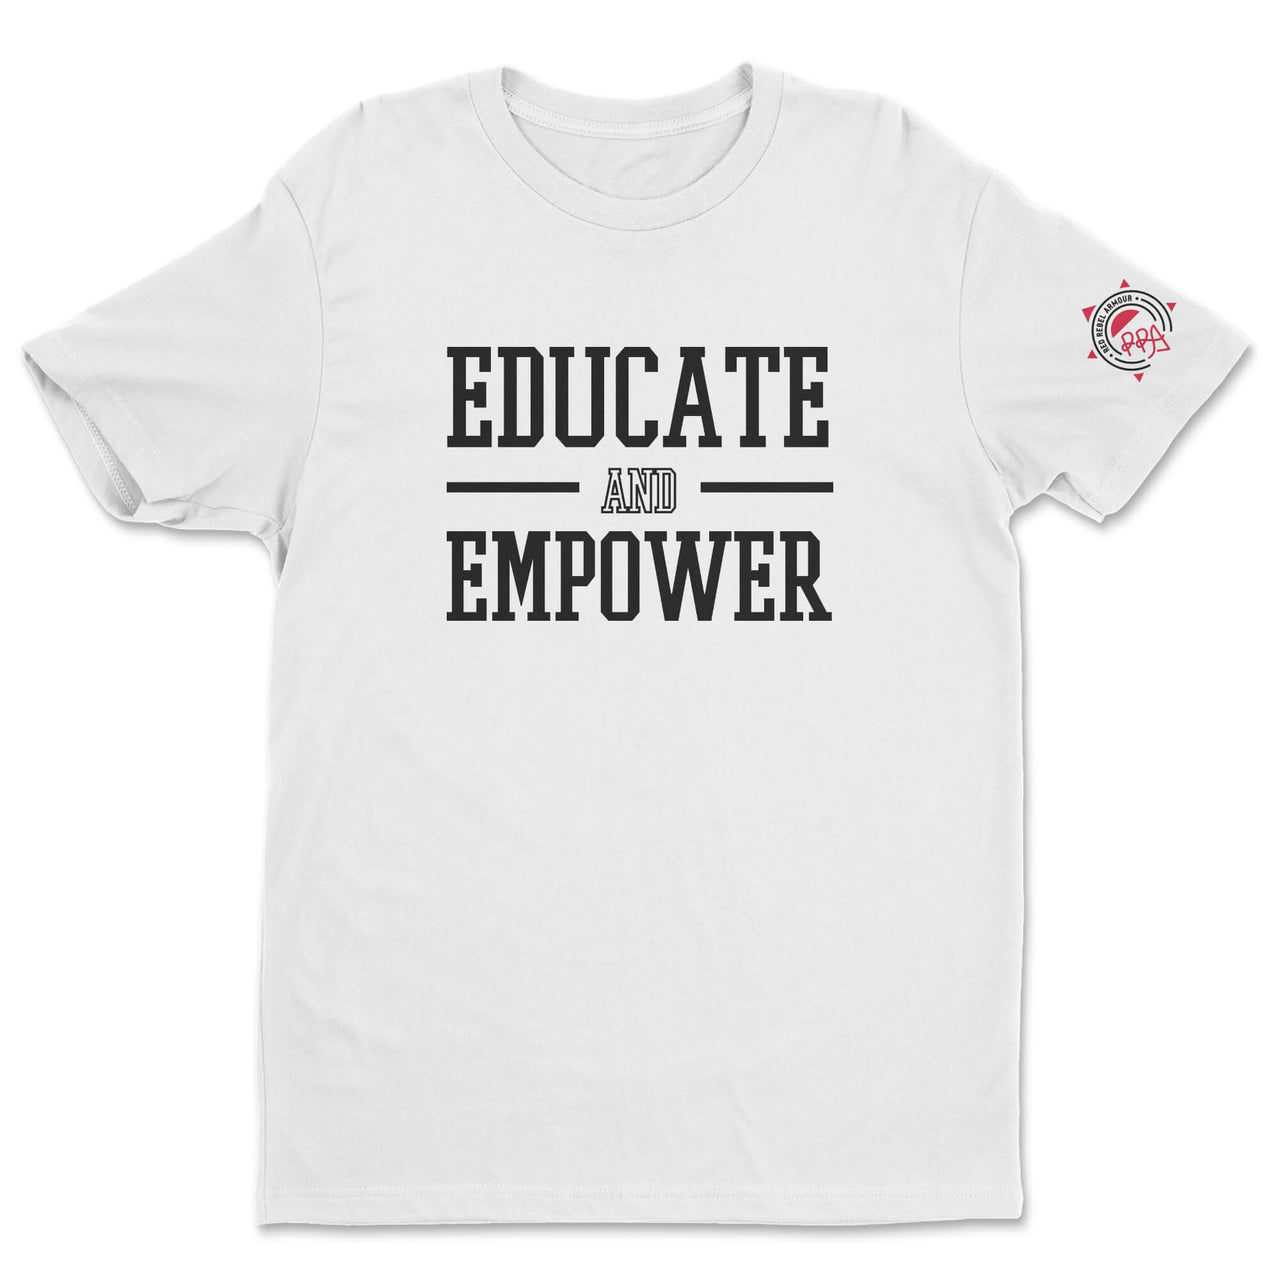 Educate And Empower Tee